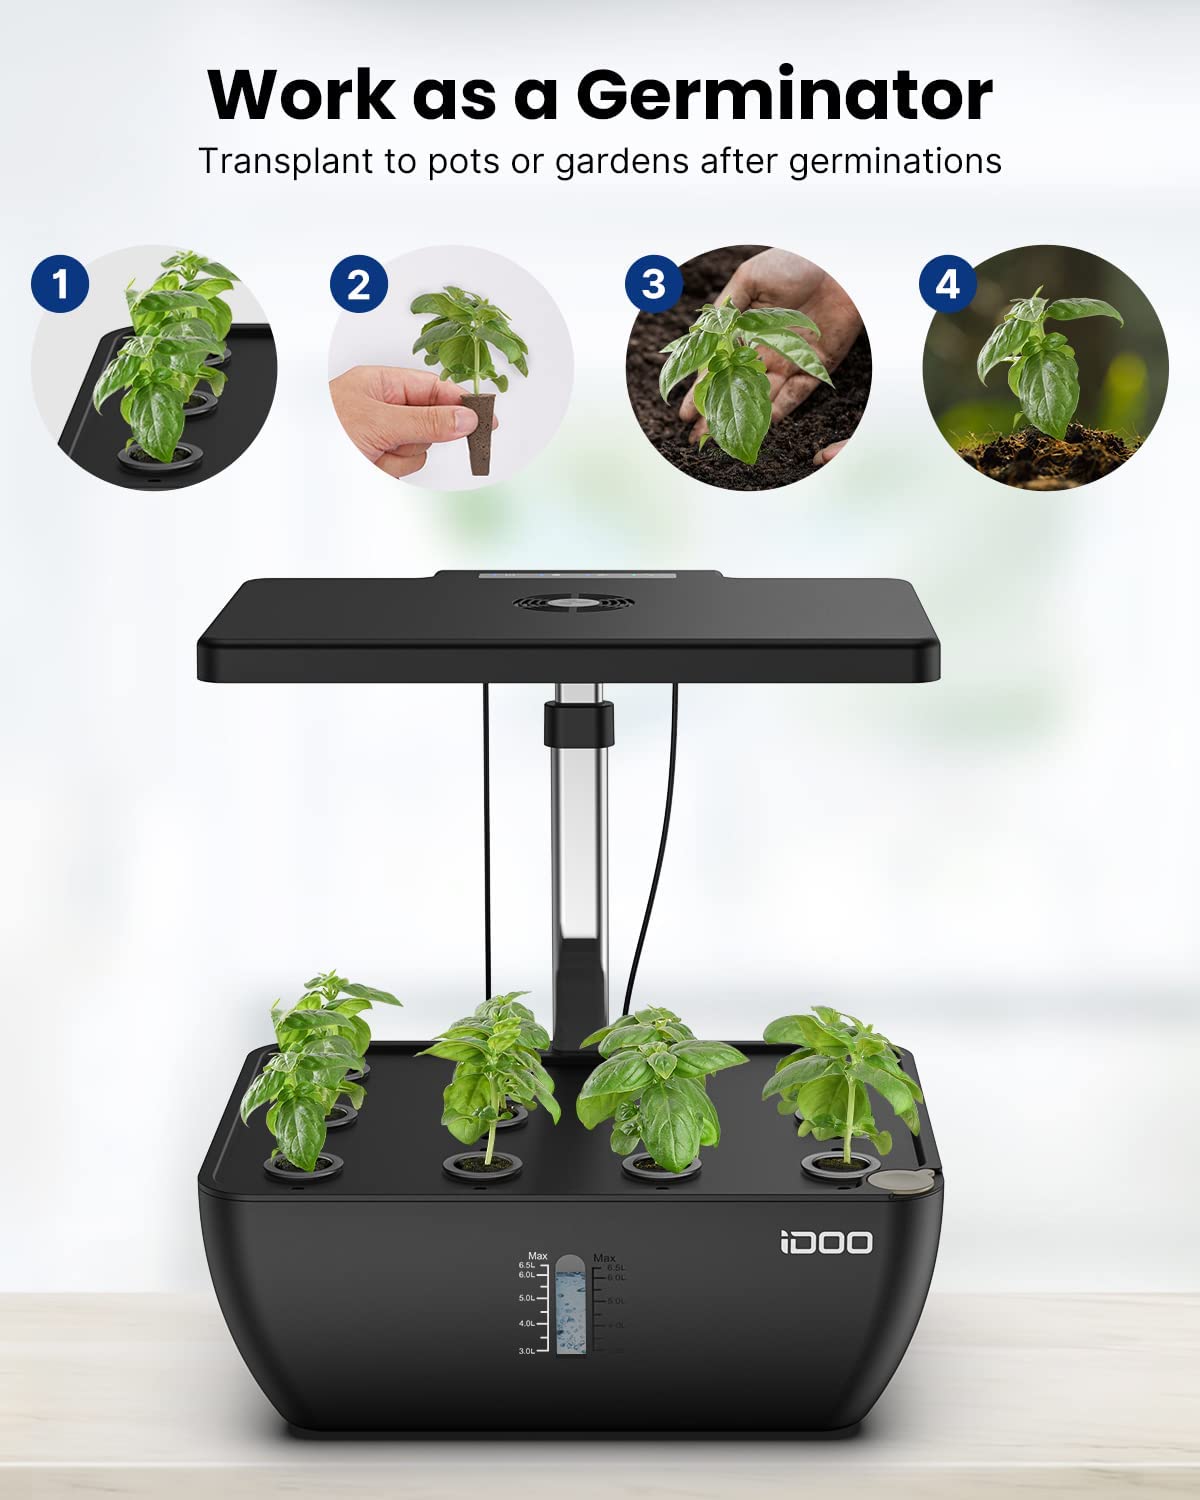 iDOO 12 Pods Hydroponics Growing System with 6.5L Water Tank - Hydroponic Growing System Hydroponic Growing Systems by idoo